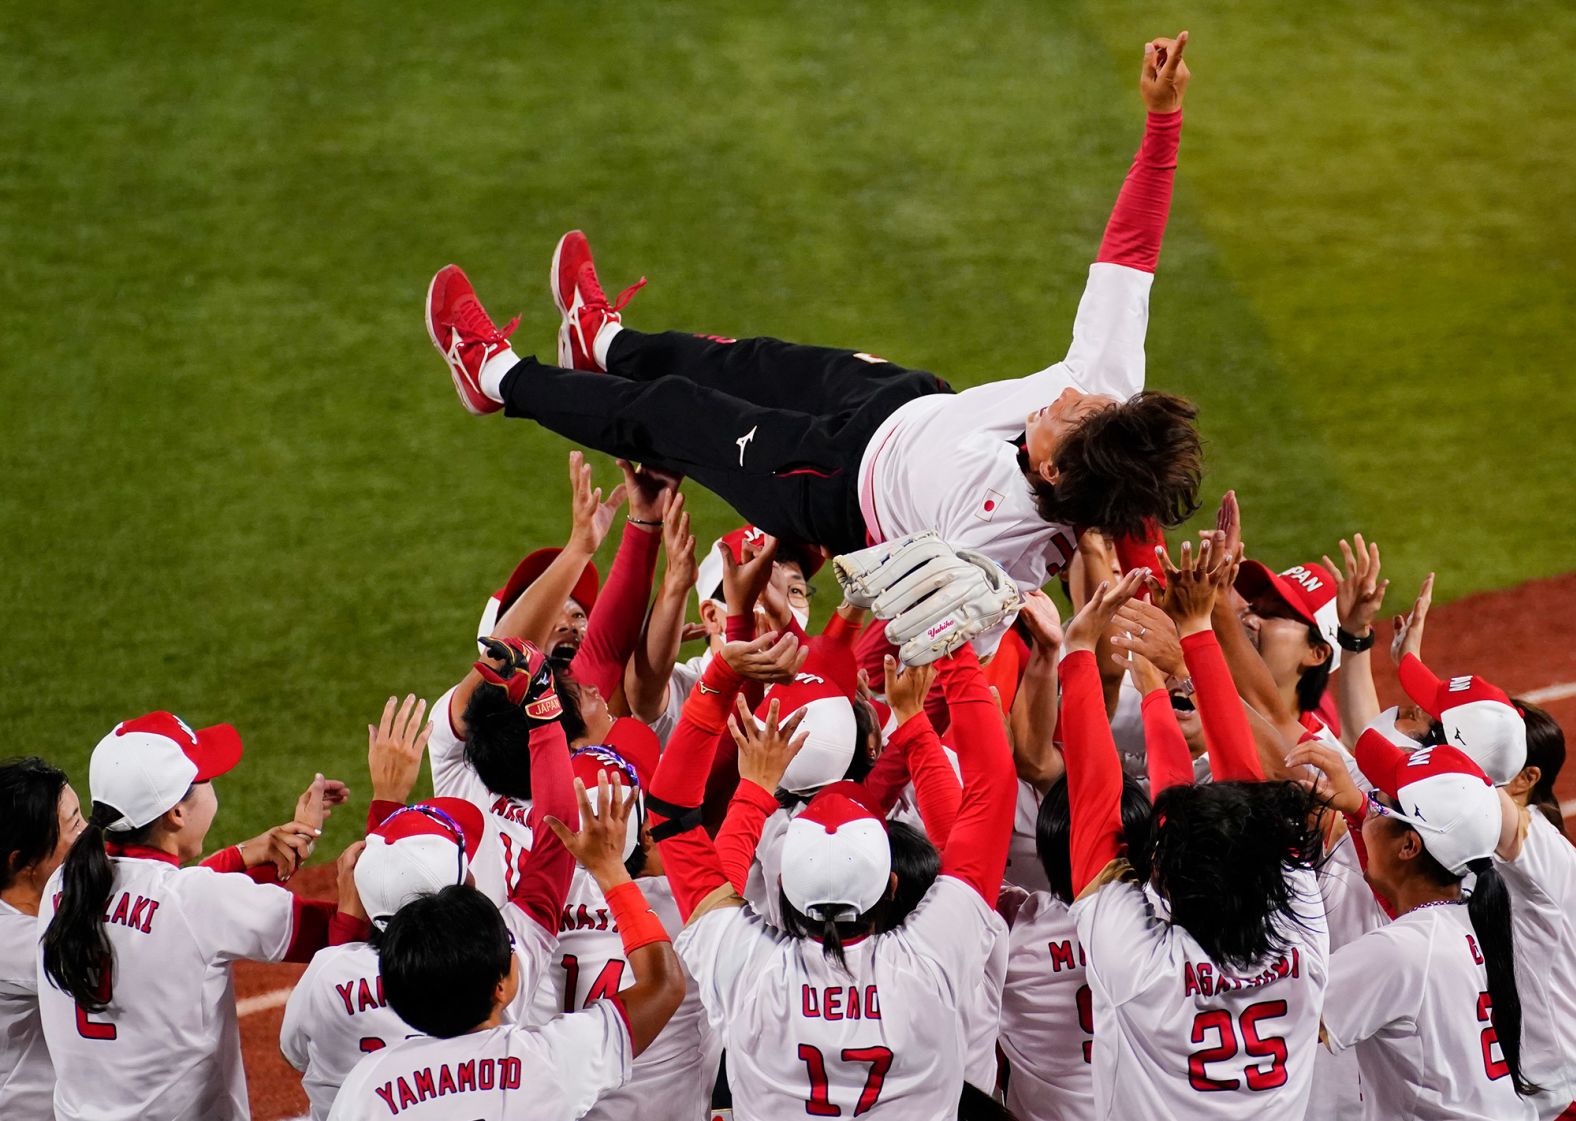 Japan's softball team celebrates with head coach Reika Utsugi after winning the gold-medal game against the United States on July 27. <a href="index.php?page=&url=https%3A%2F%2Fwww.cnn.com%2Fworld%2Flive-news%2Ftokyo-2020-olympics-07-27-21-spt%2Fh_13b9a6c62c003209afe550b465f7ab7e" target="_blank">Japan won 2-0.</a>